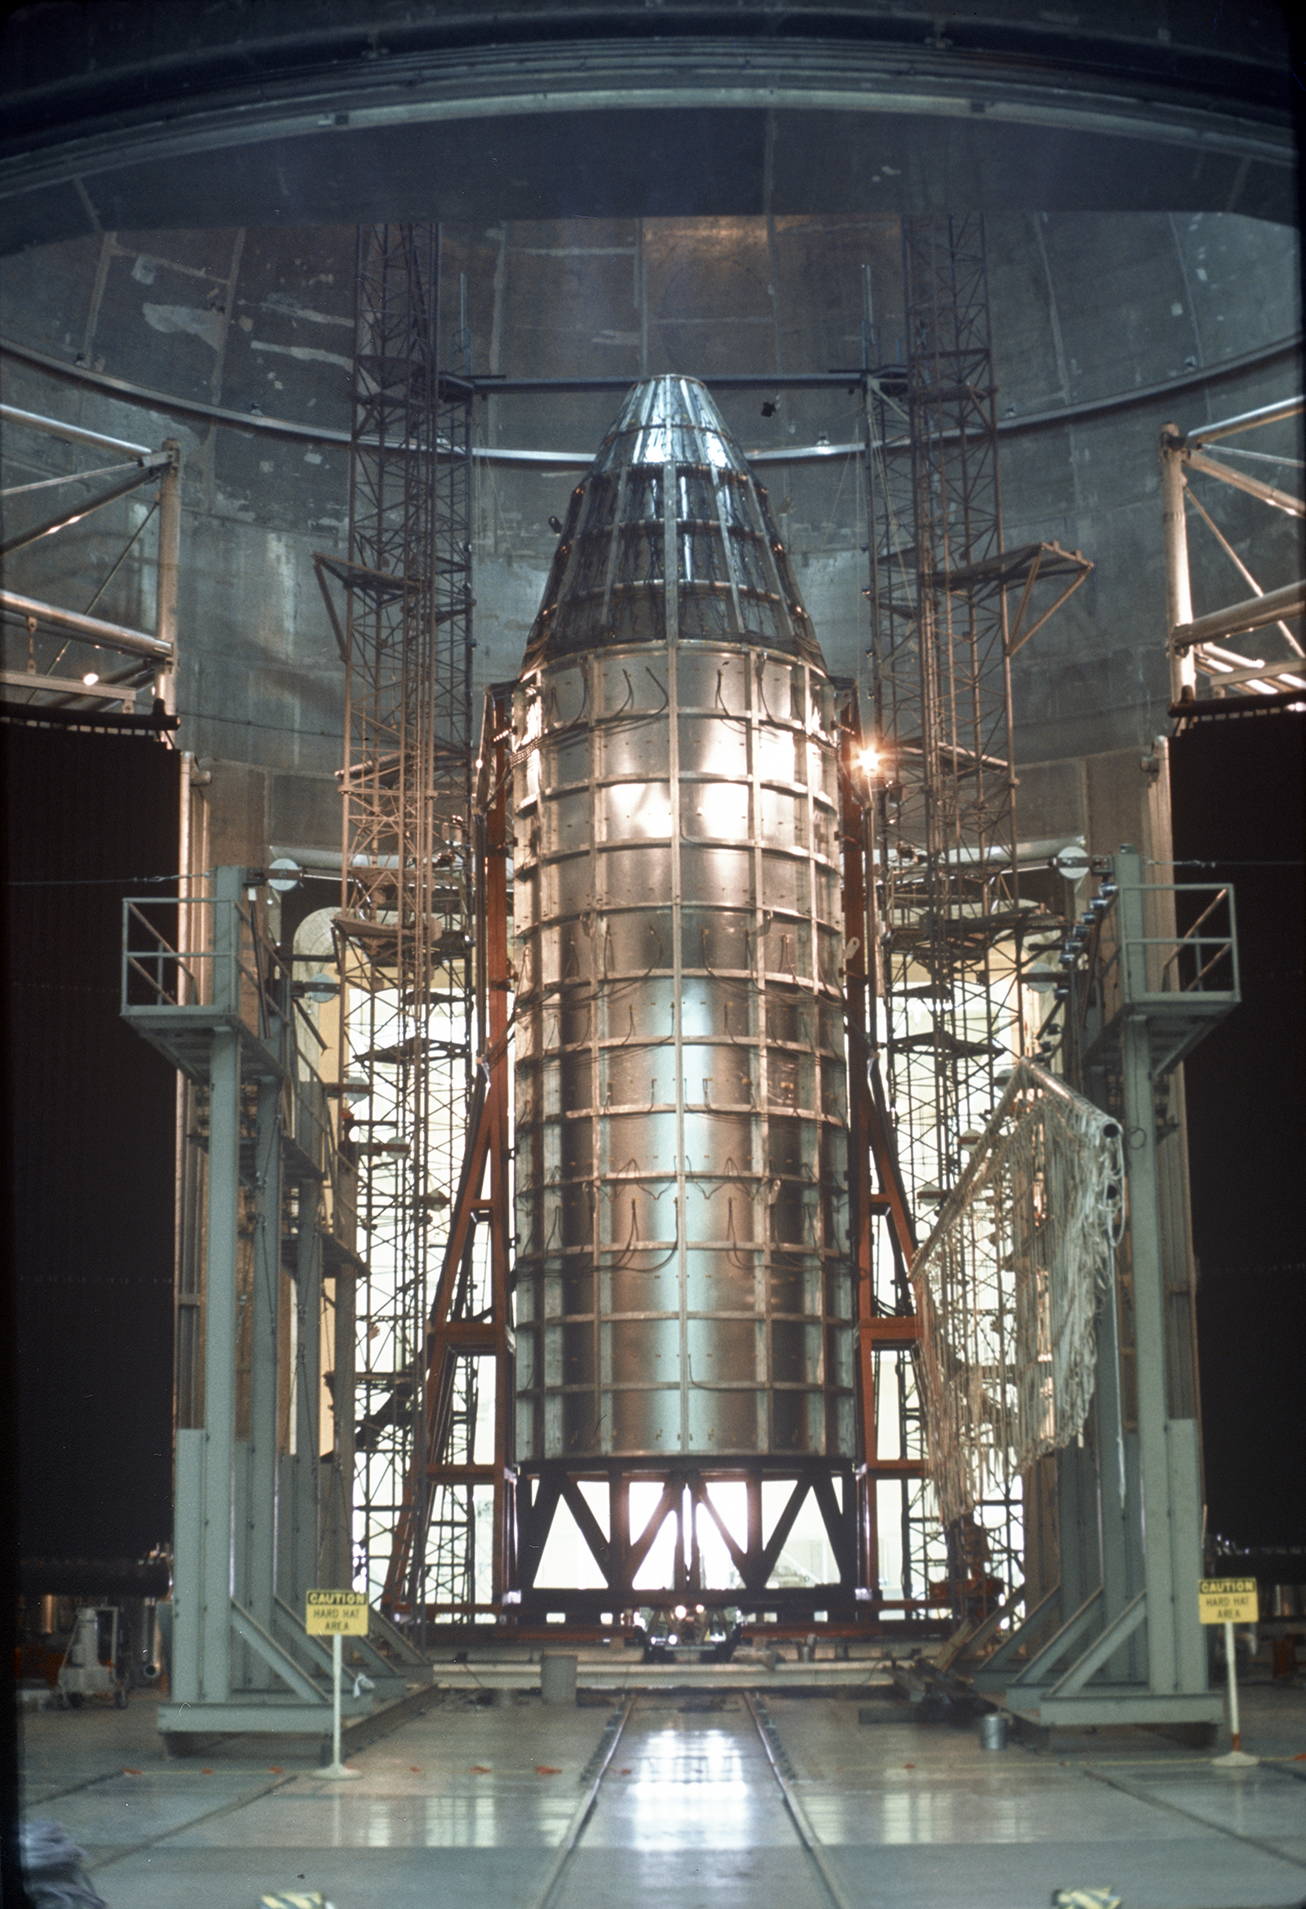 Spacecraft in vacuum chamber surrounded by scaffolding.